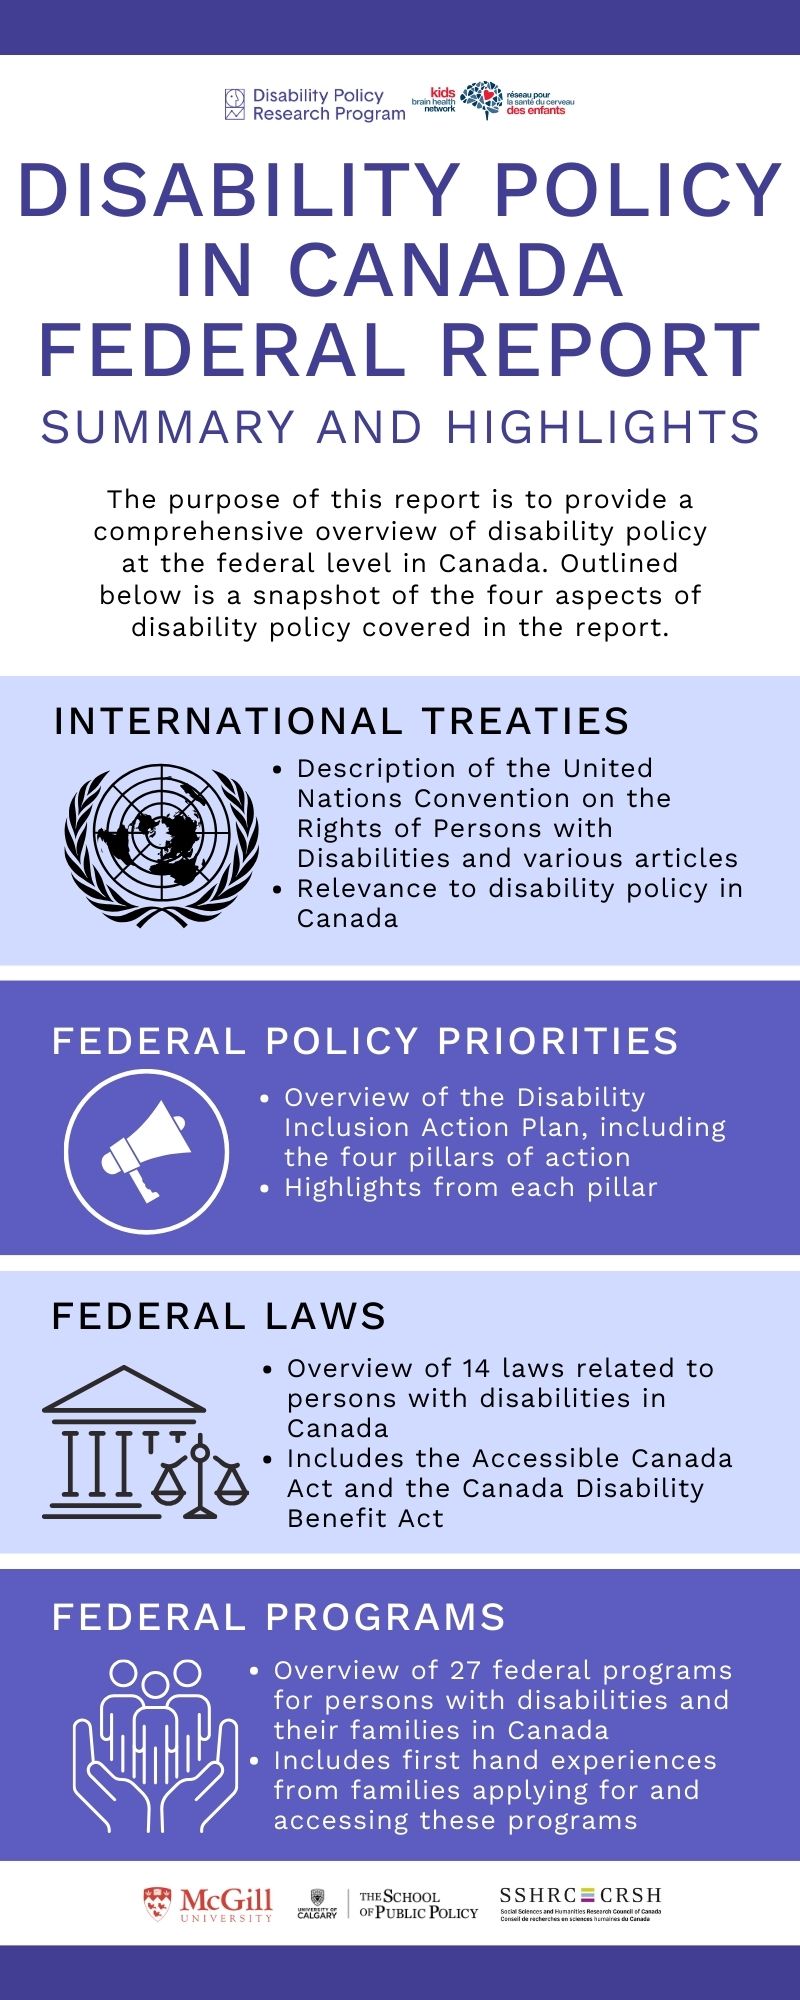 Disability Policy in Canada Federal Report Infographic_Nov27